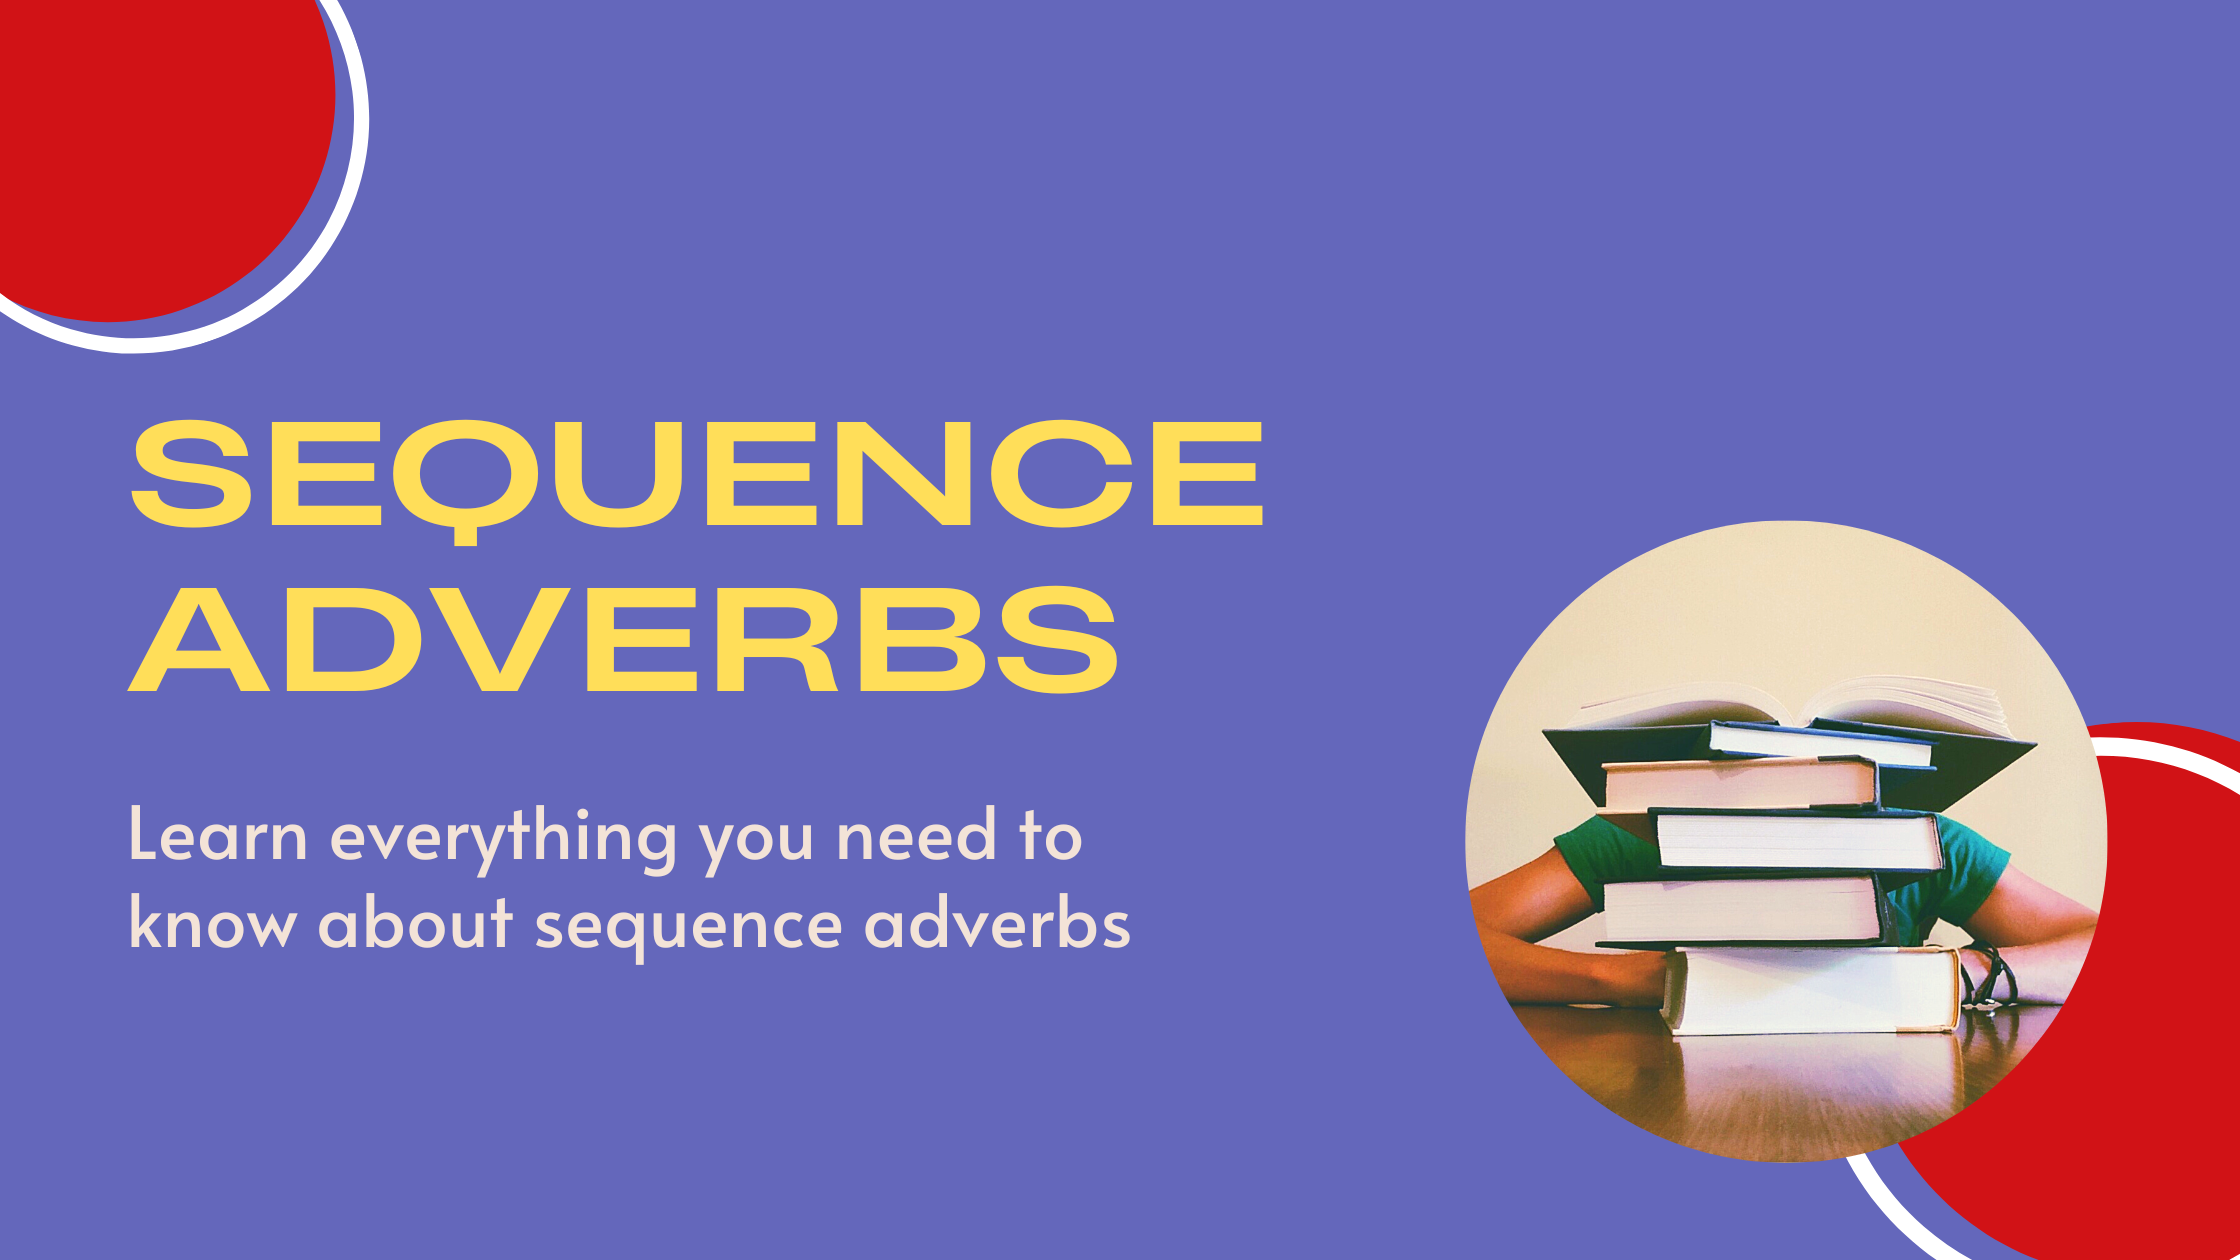 Sequence adverbs